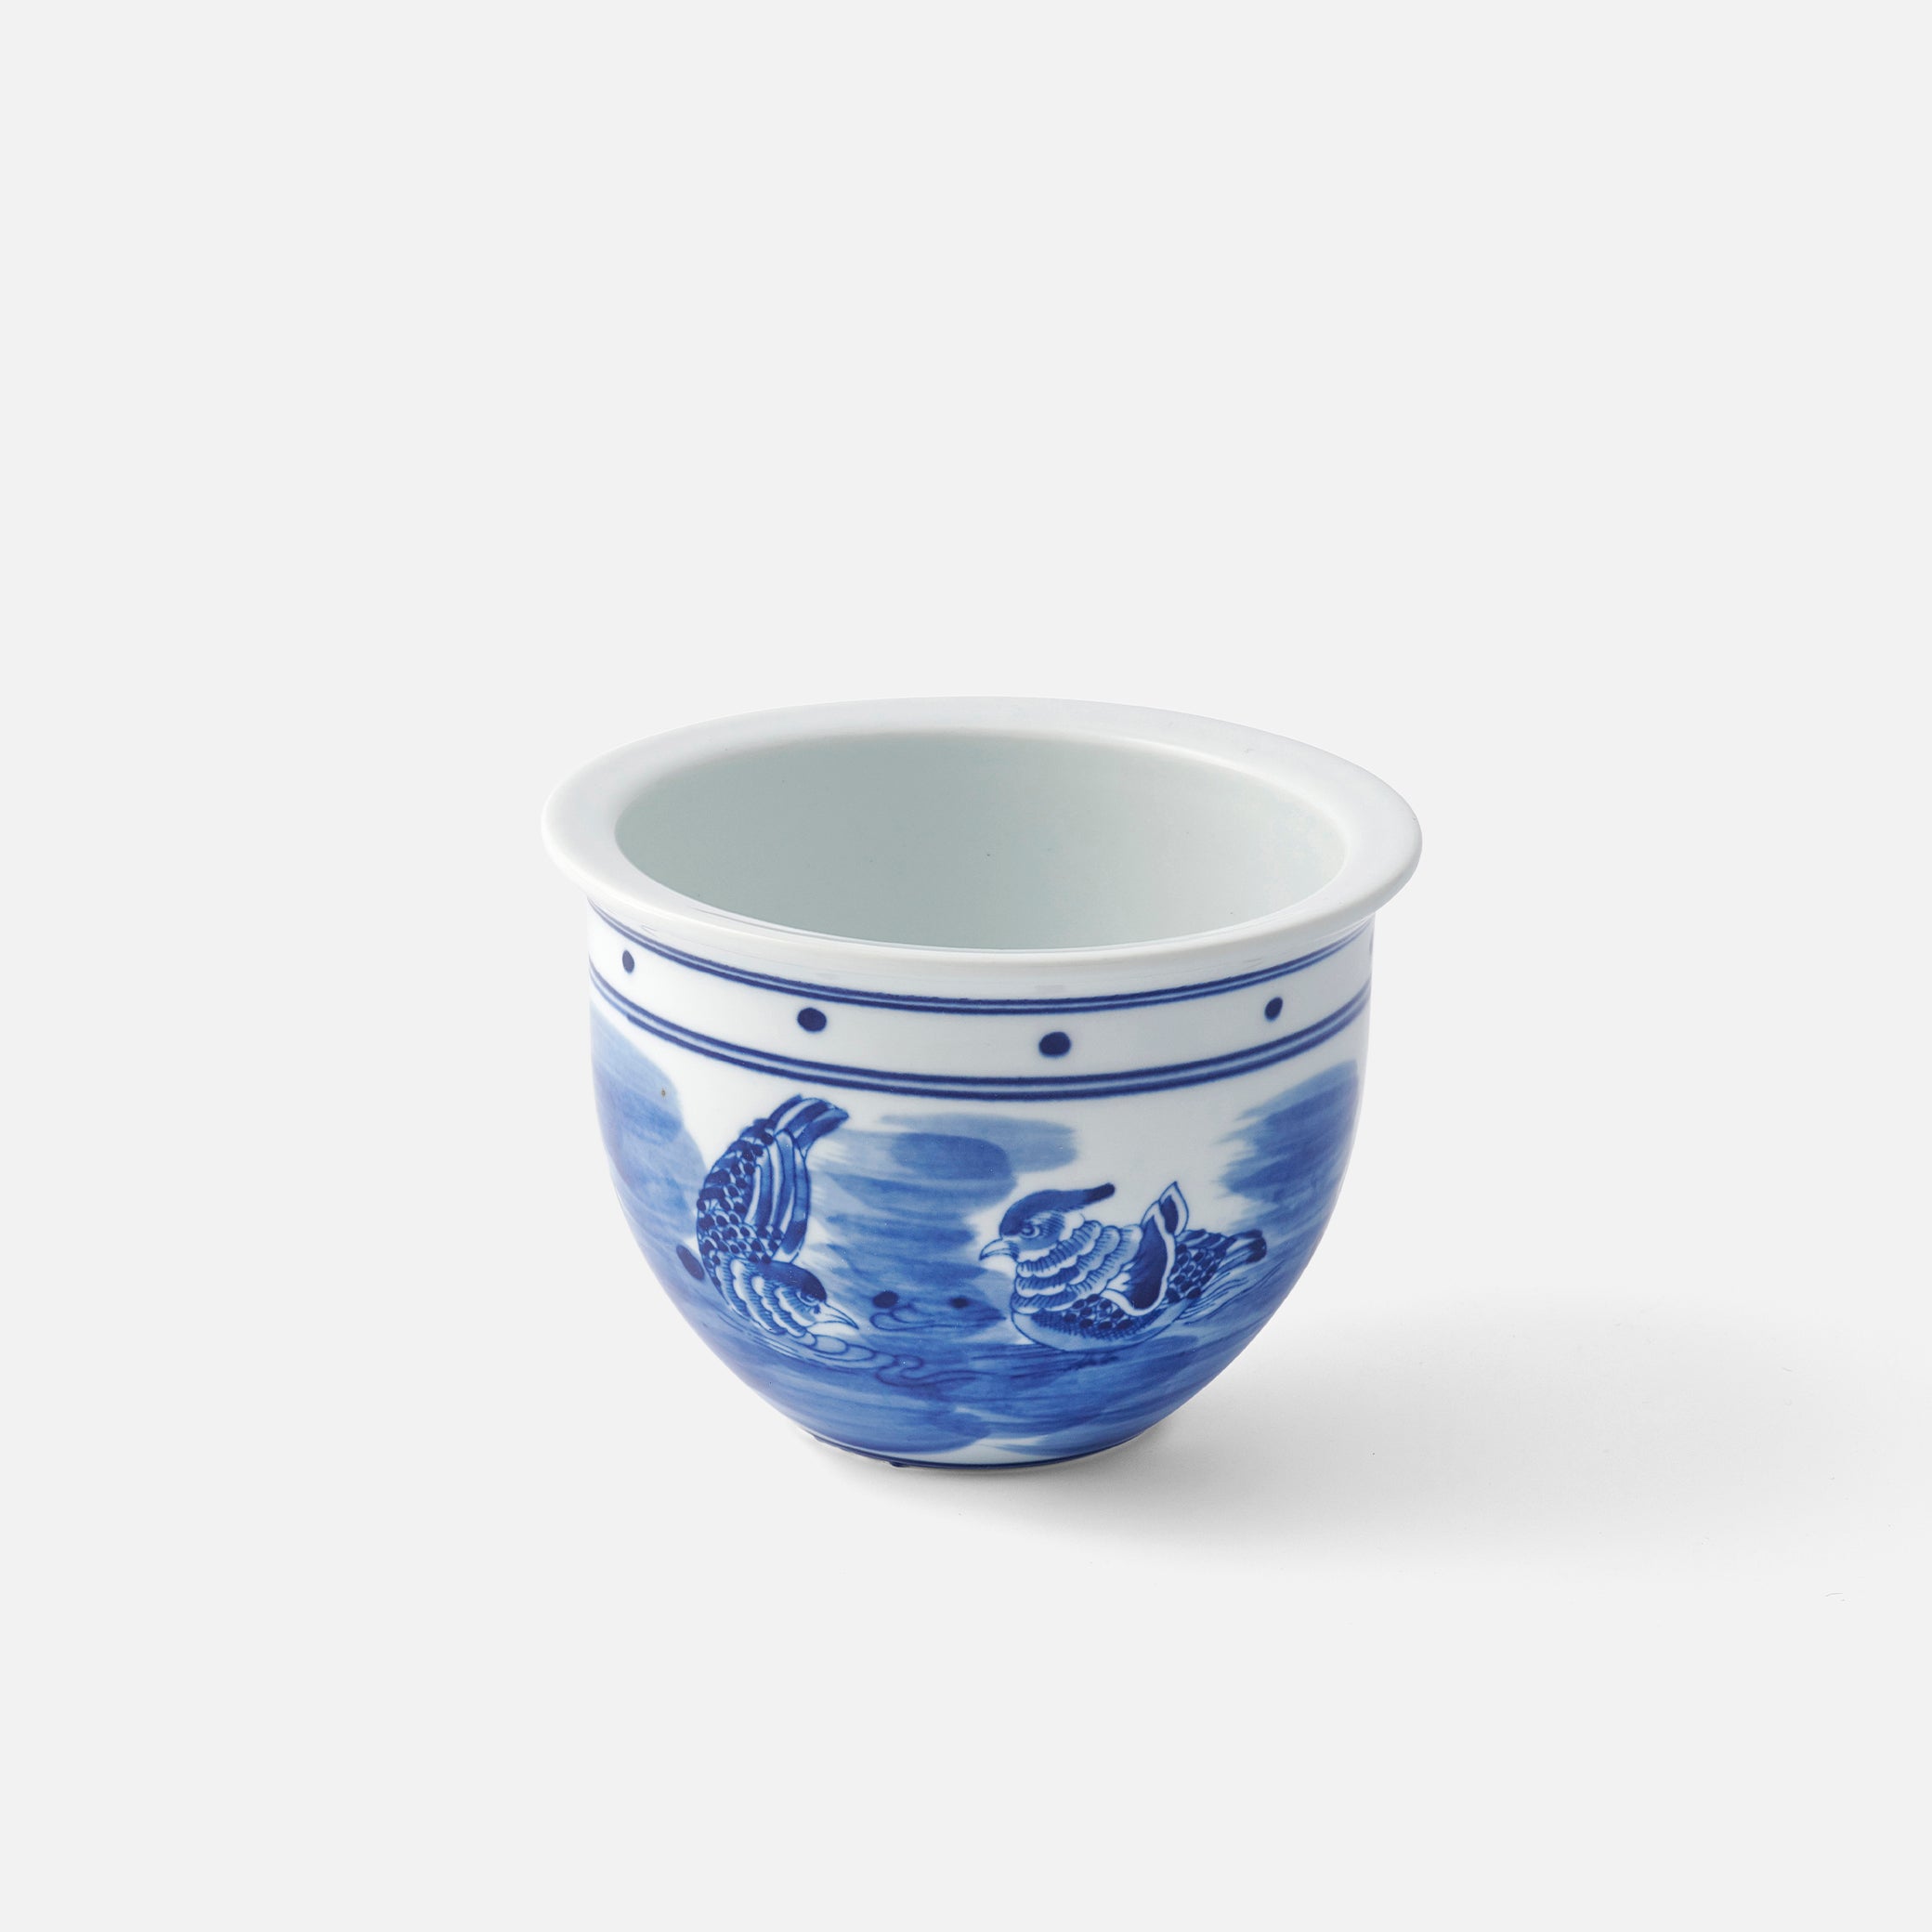 Planter with oriental bird motifs, Small - Blue and White